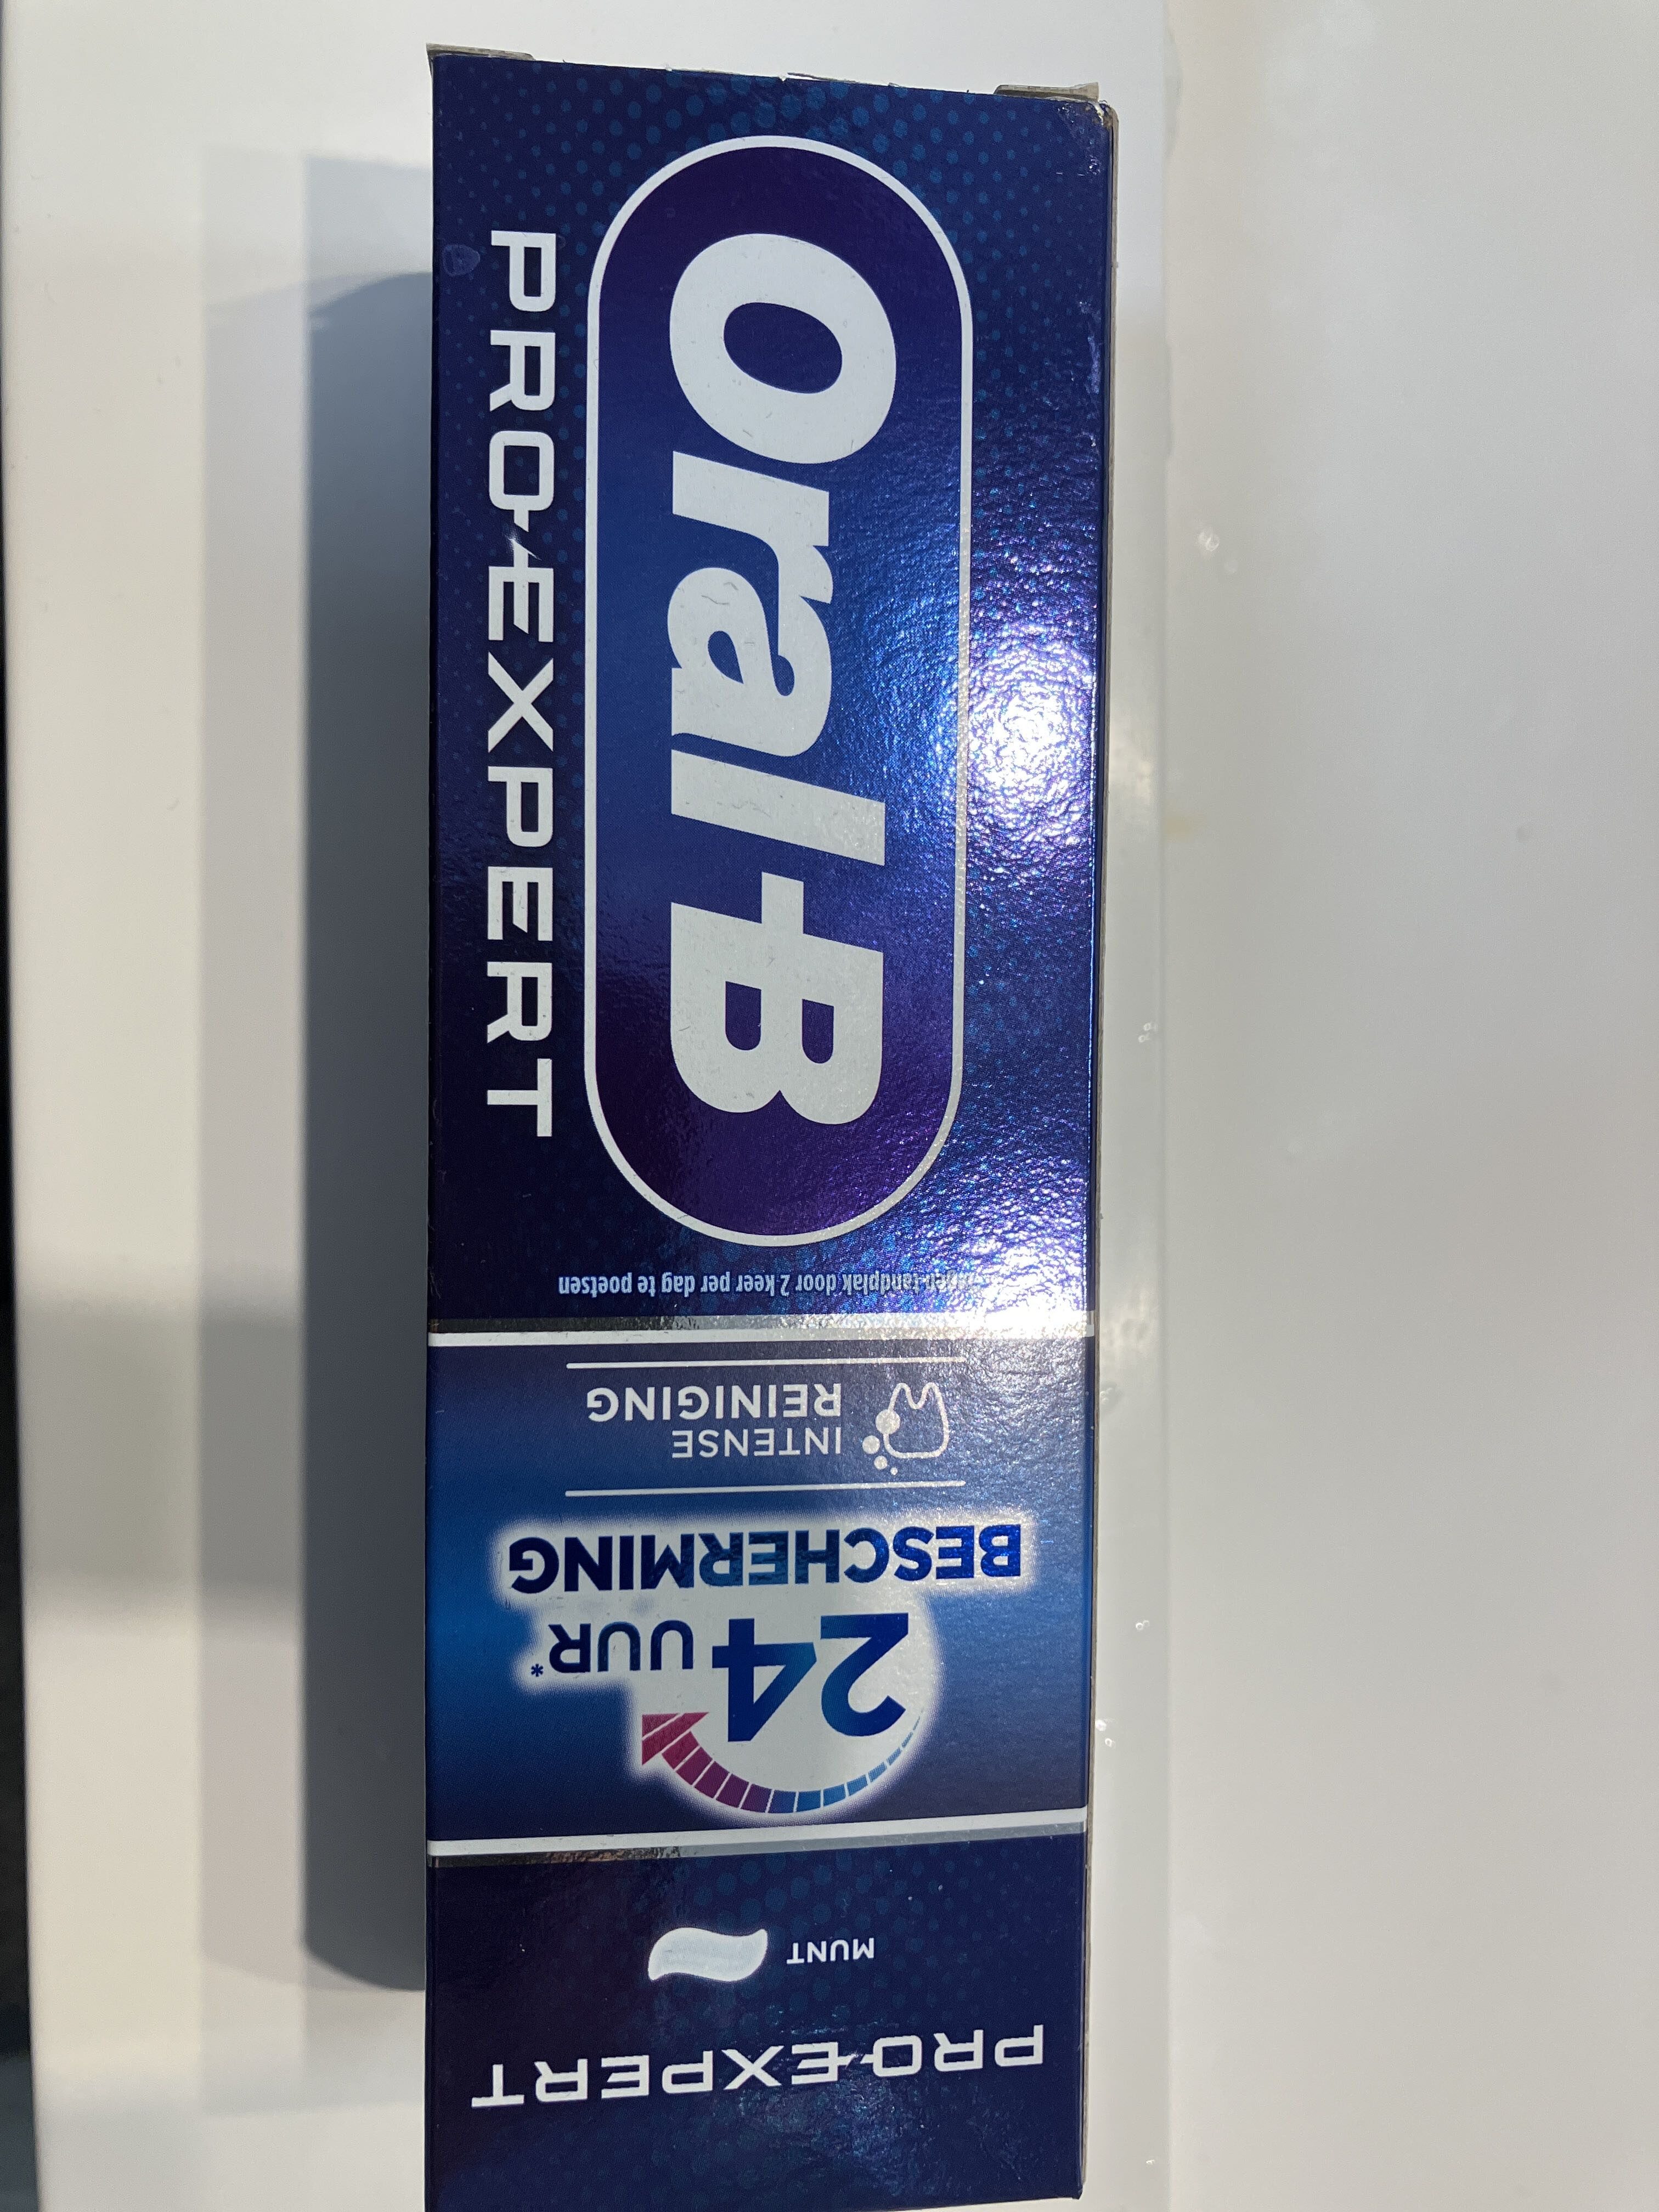 ORAL B PRO EXPERT - Product - fr